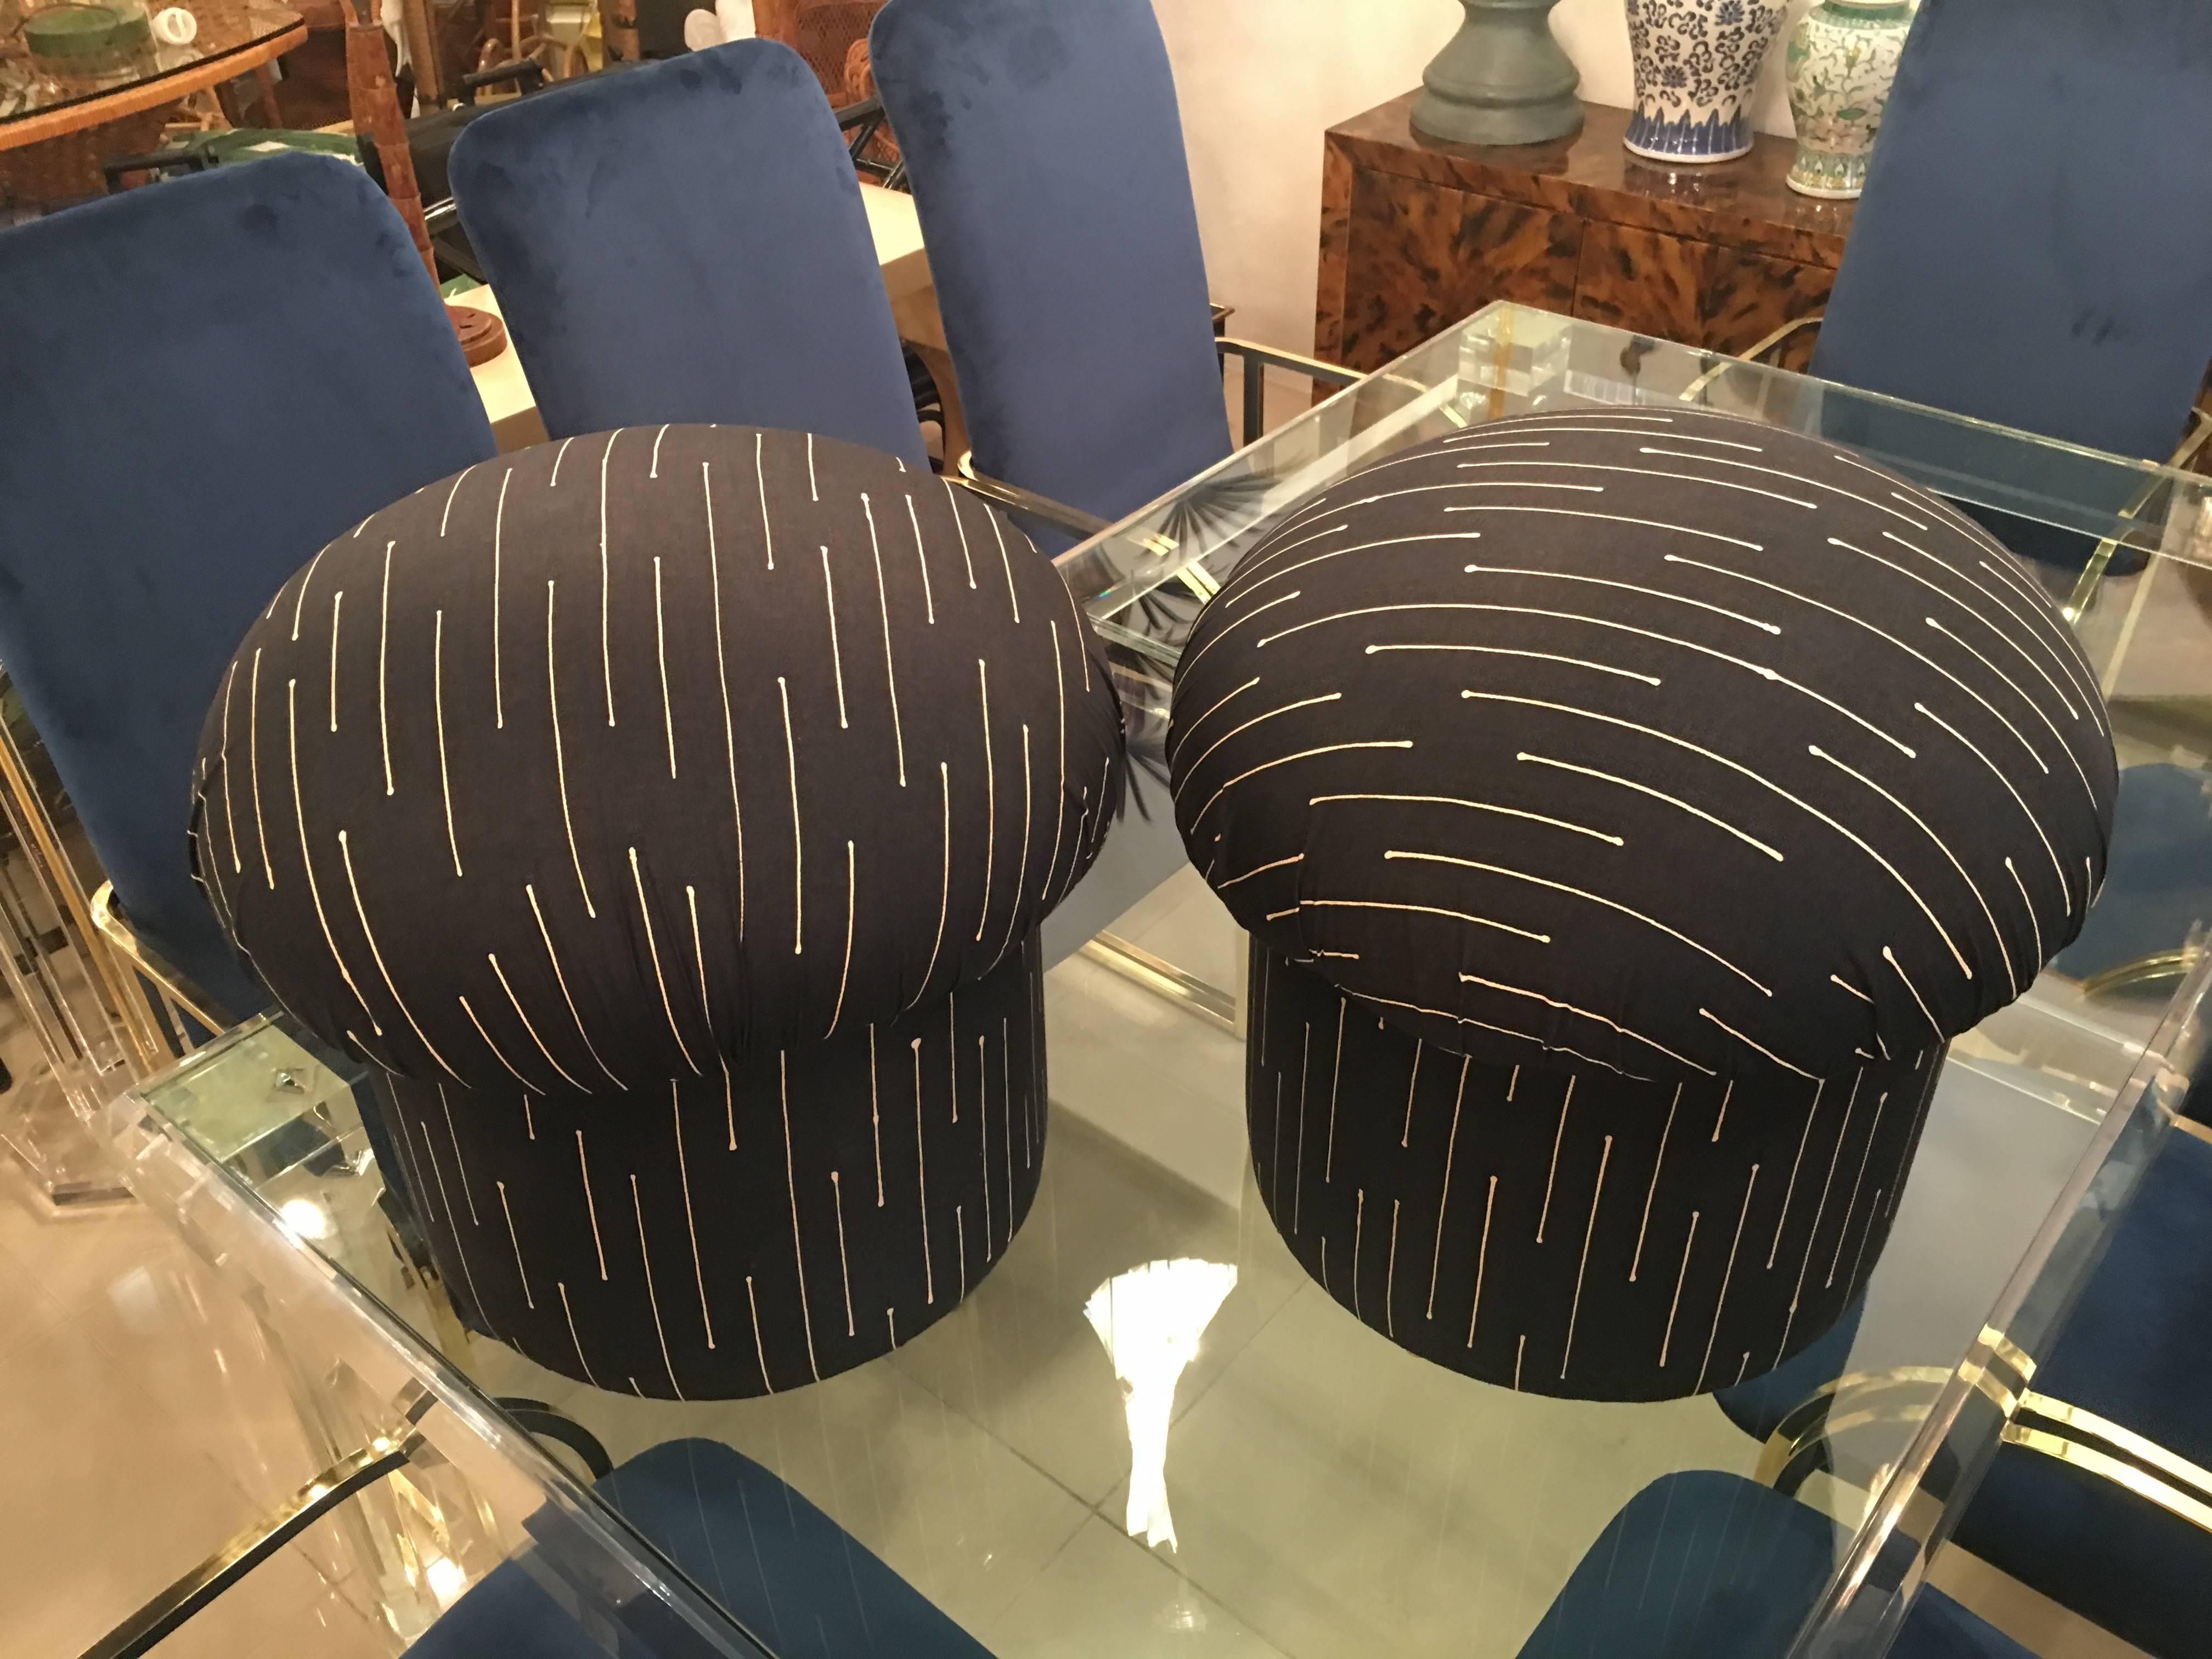 Vintage pair of mushroom stools, benches, ottomans with original retro graphic upholstery. The upholstery has been professionally steam cleaned and is free of defects, rips, tears or stains. These are great flanking a coffee table, under a console